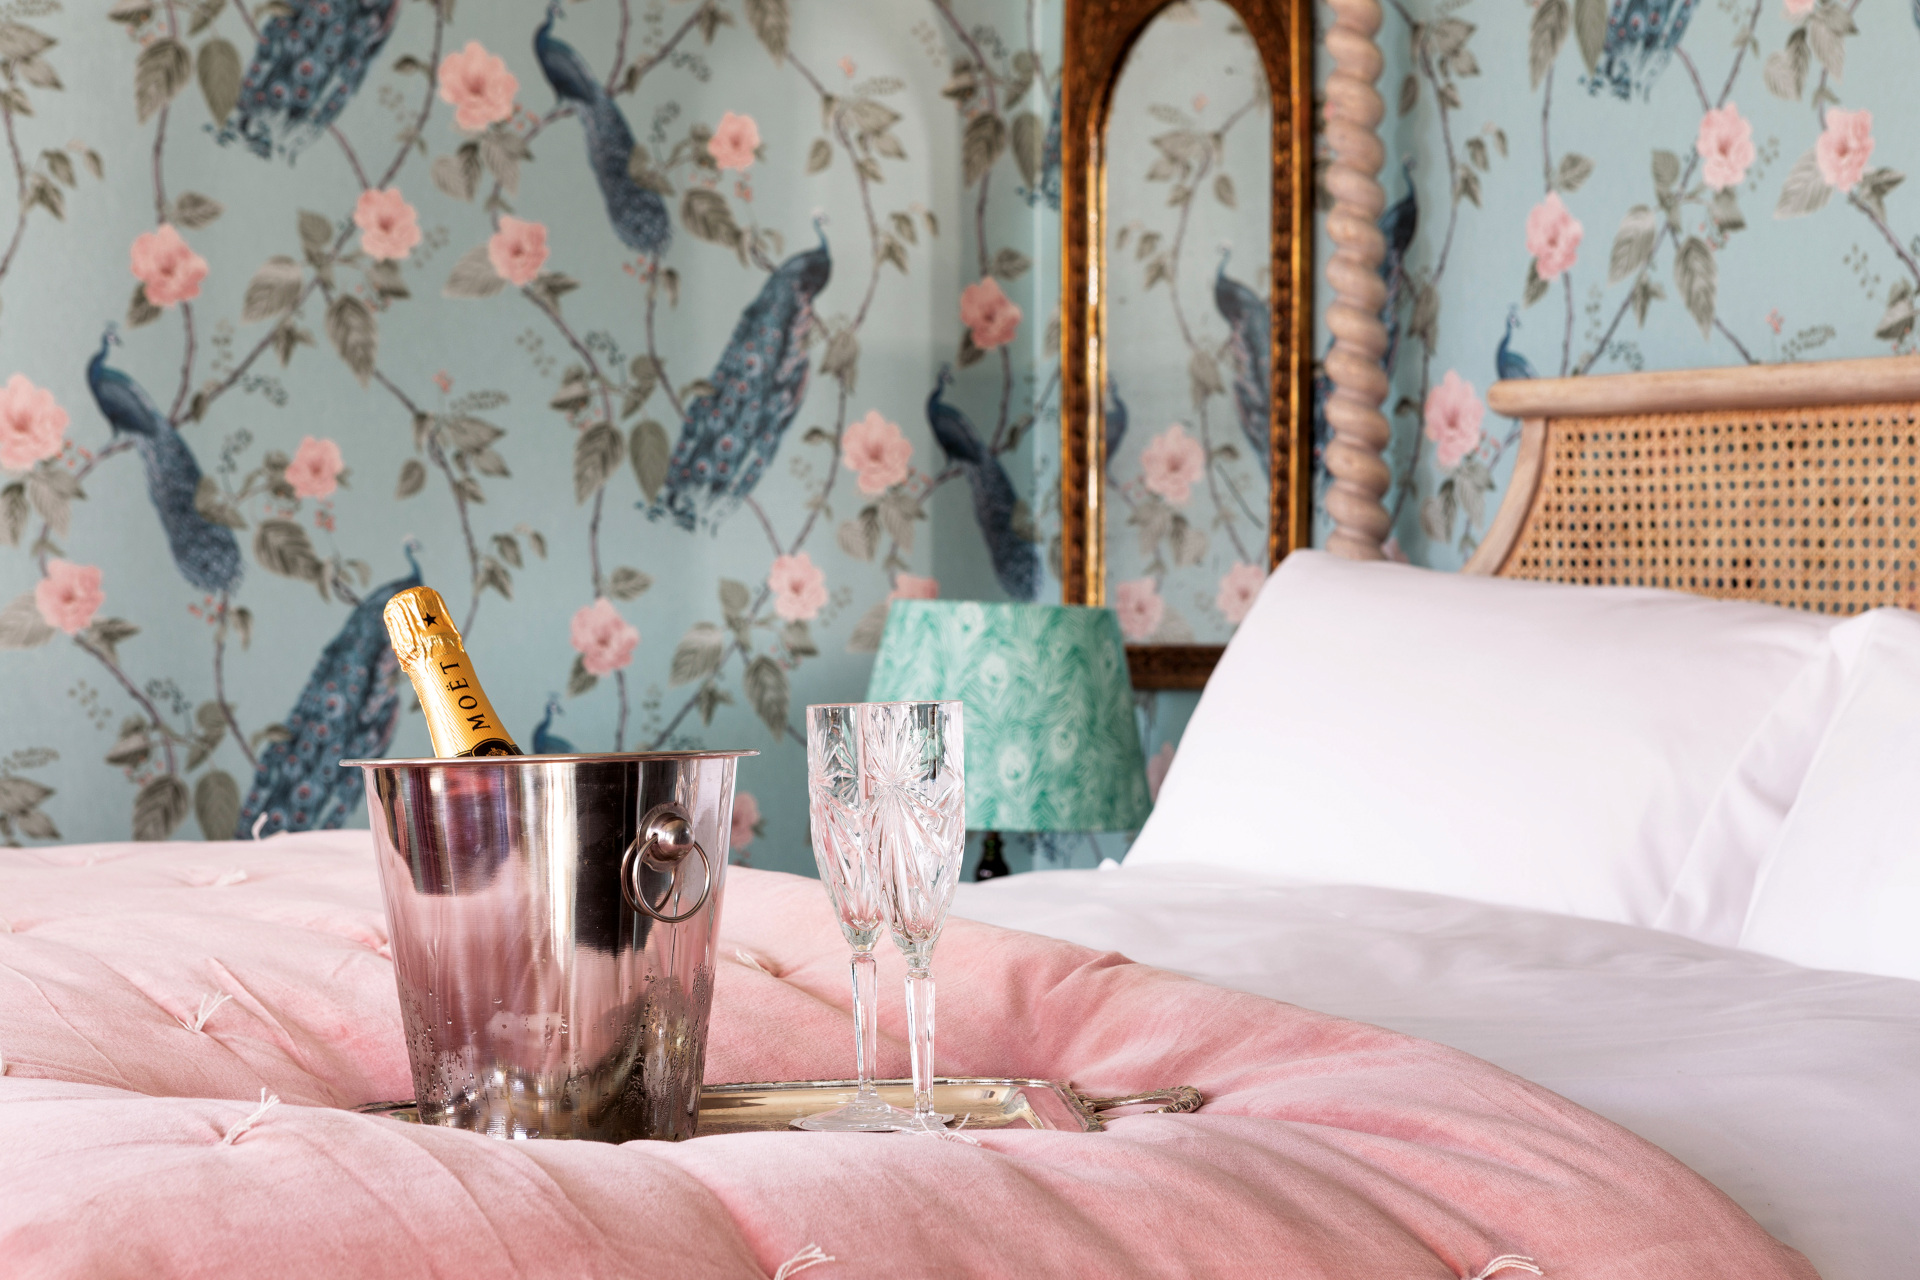 Bed with pink bedspread, a bottle of champagne and glasses on top